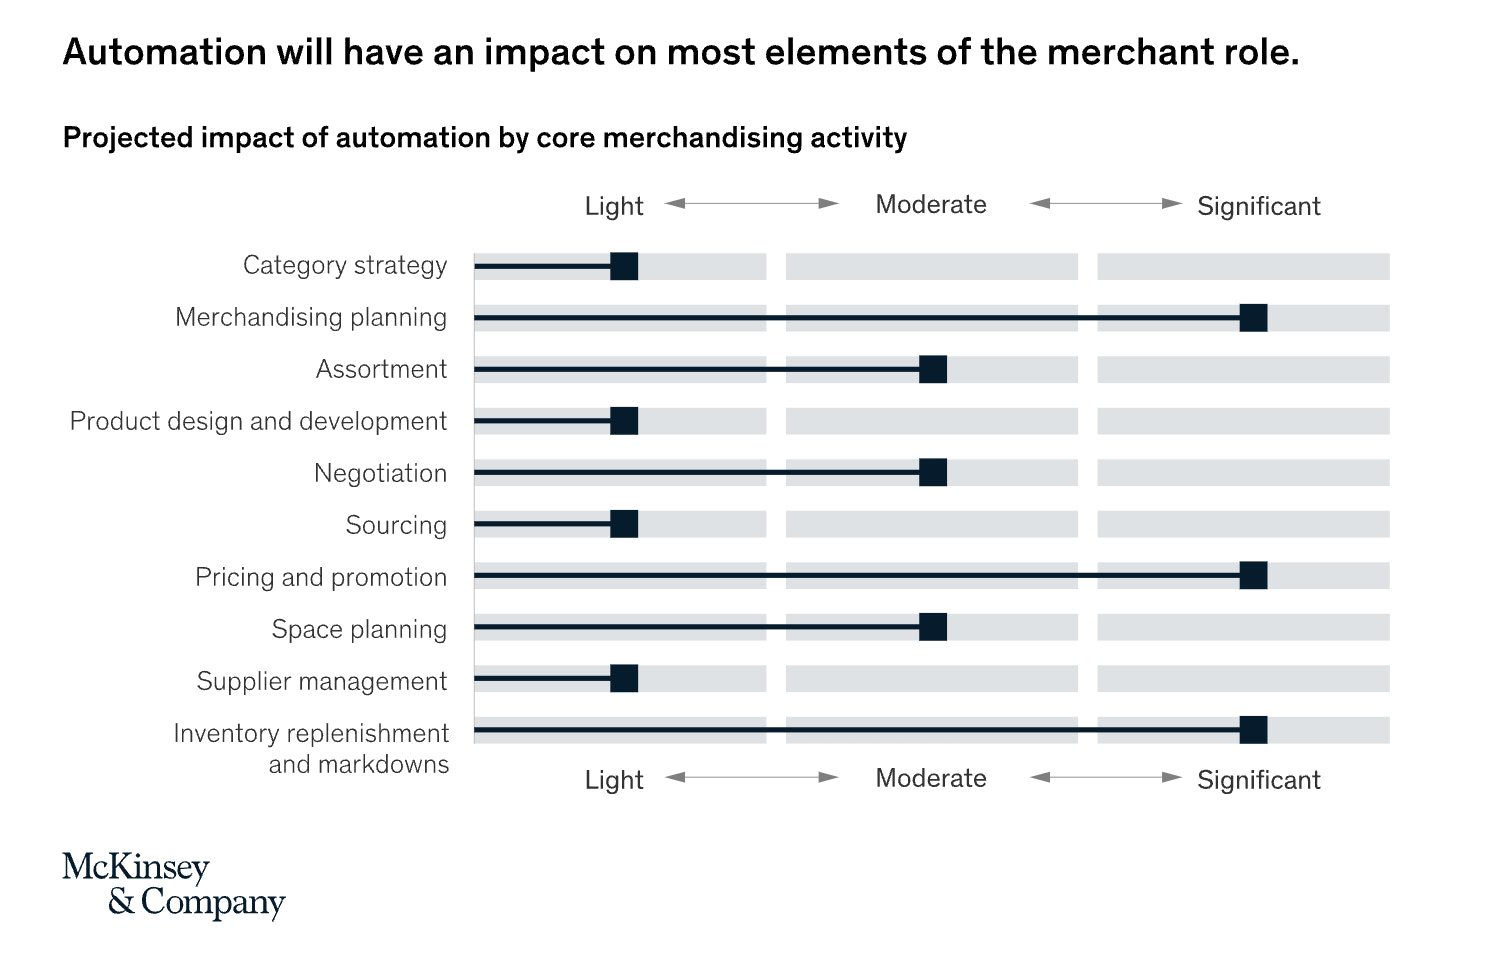 How automation will impact merchant roles